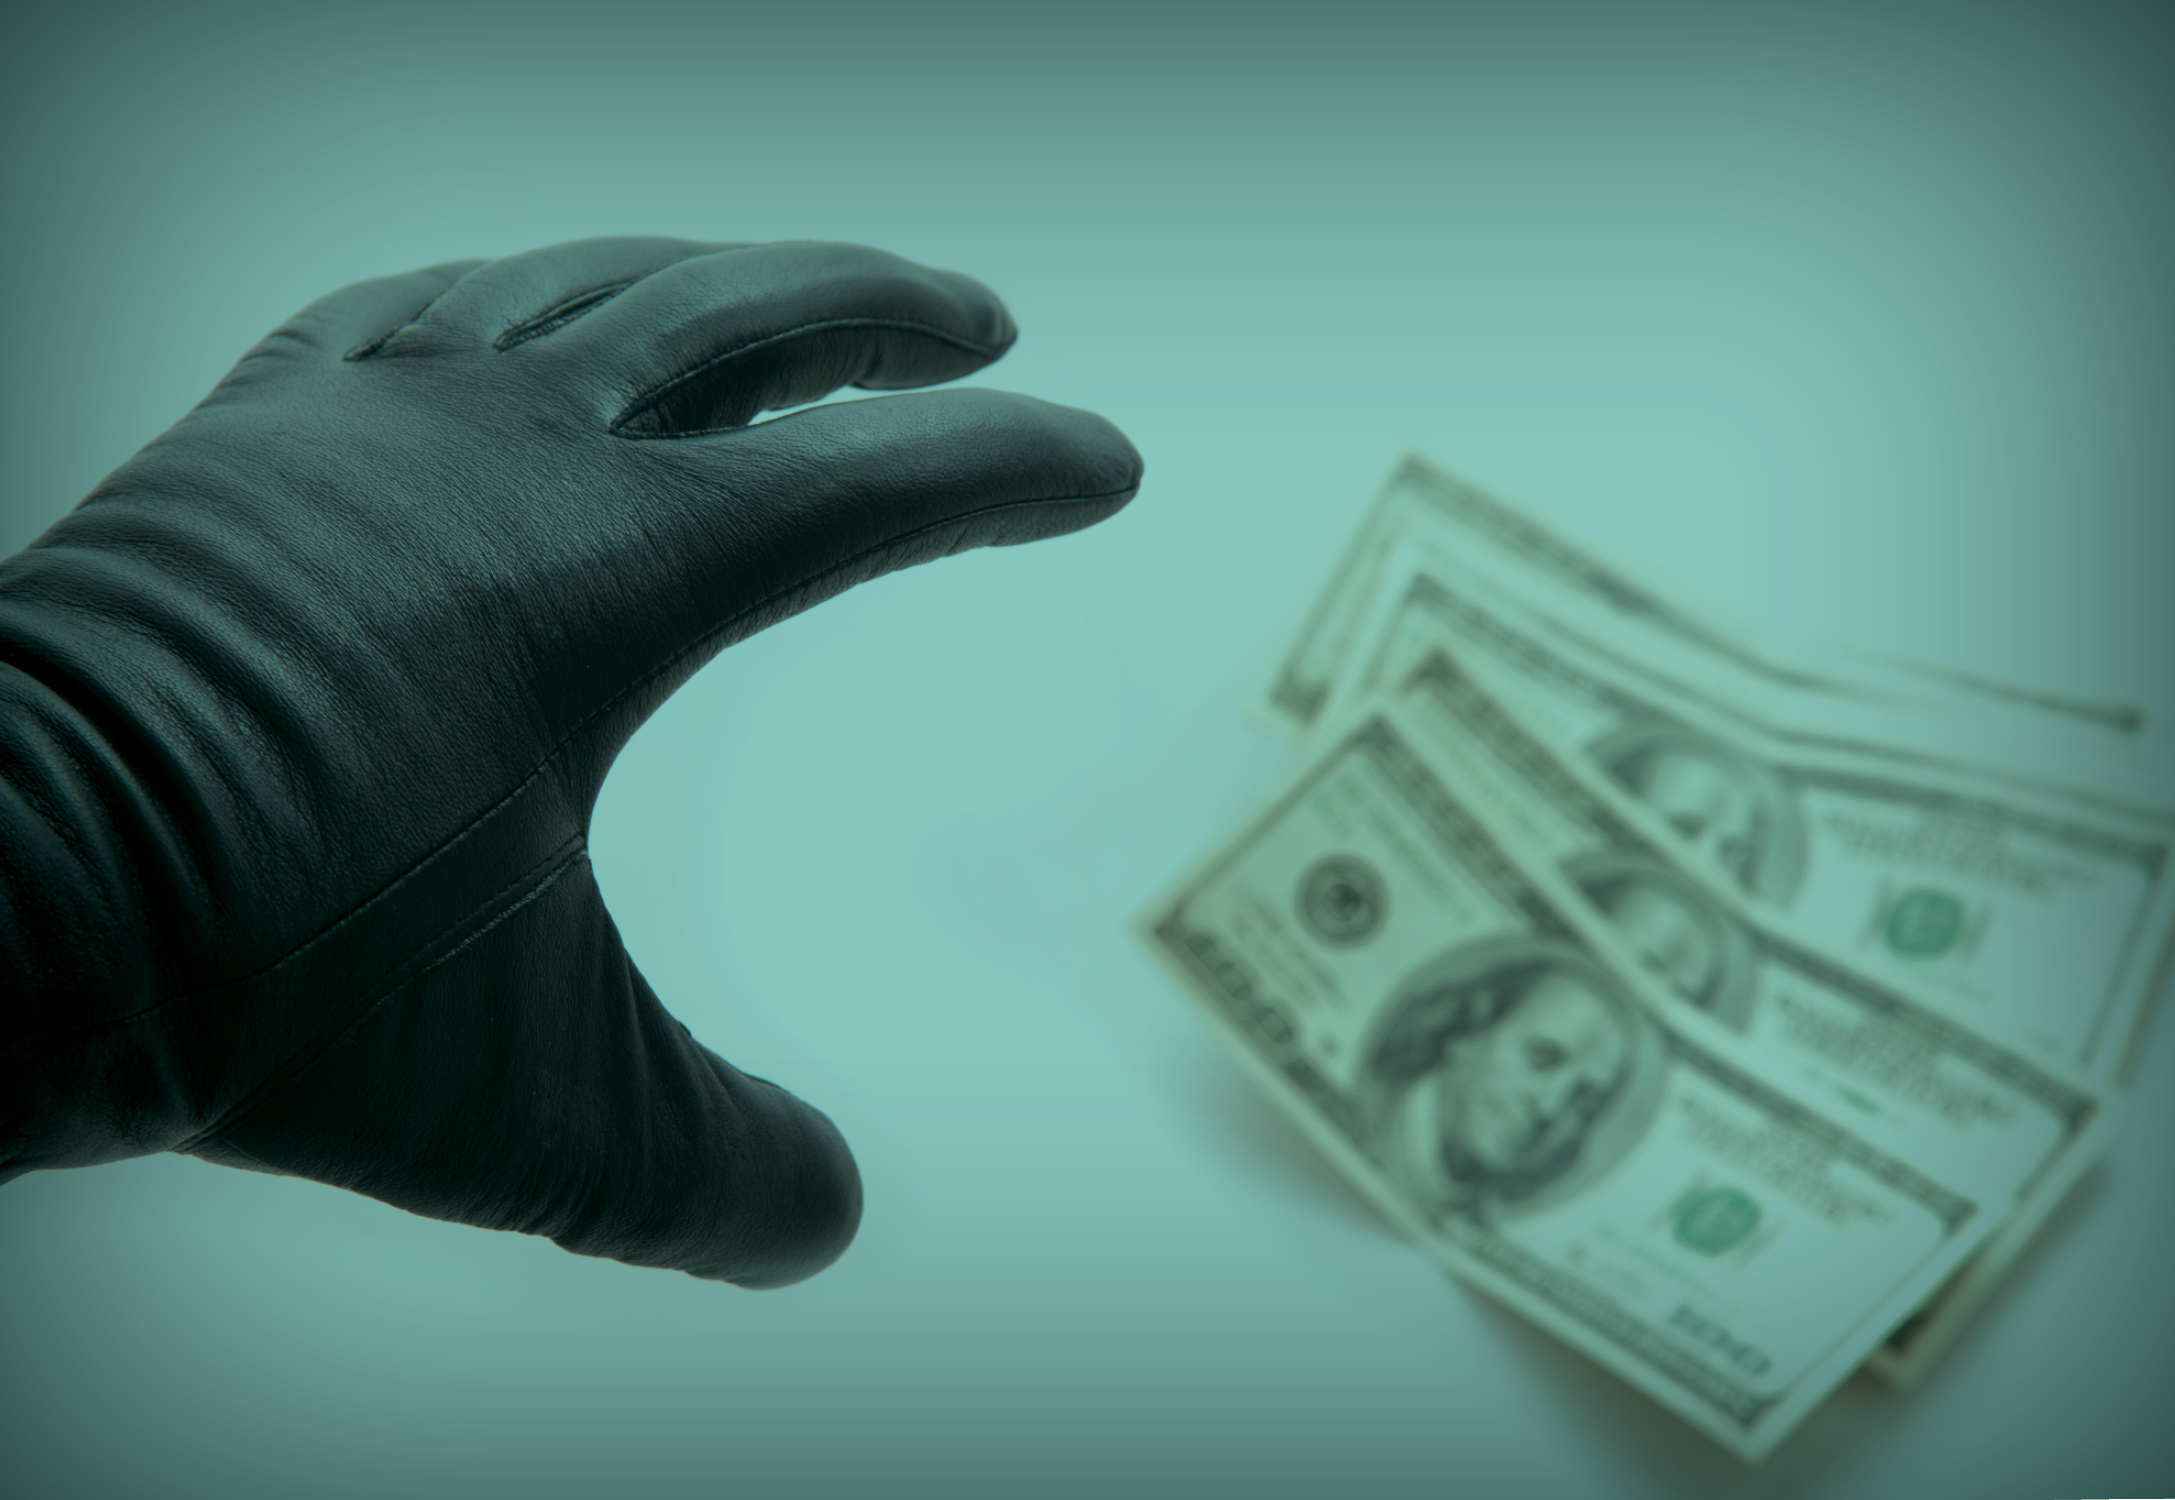 A hand reaching for money and increasing your risk